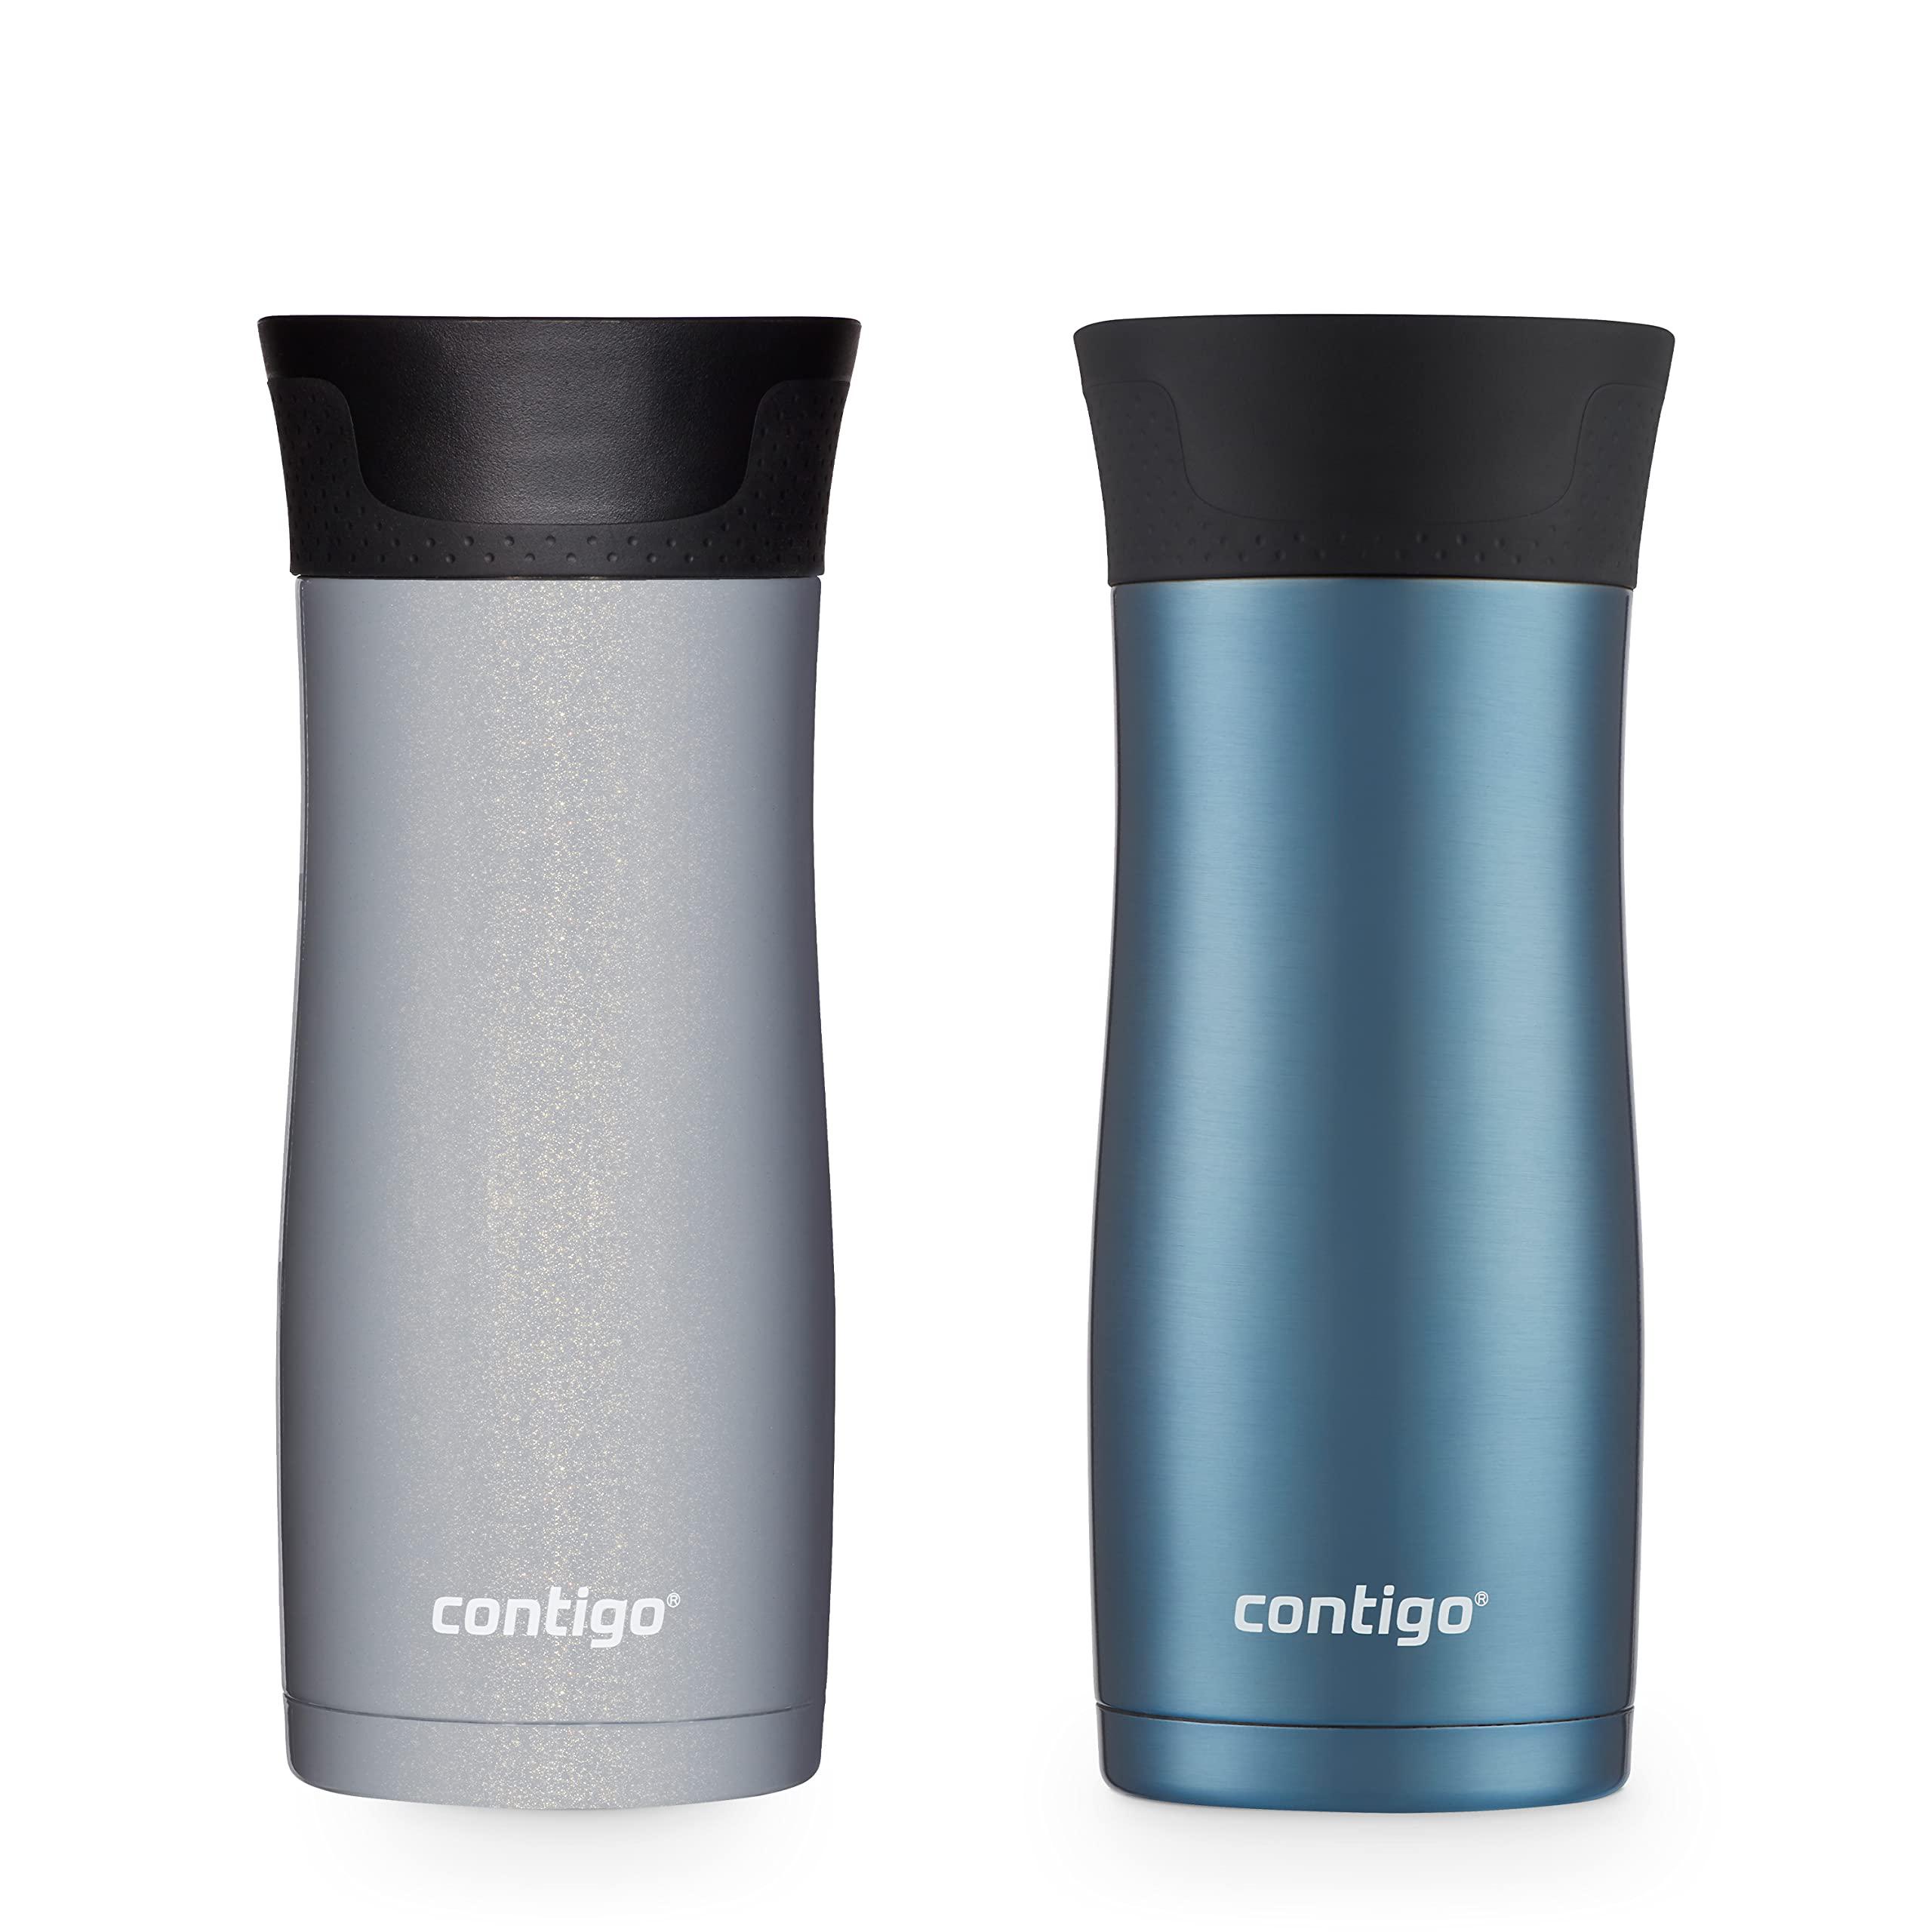 contigo west loop stainless steel vacuum-insulated travel mug with spill-proof lid, keeps drinks hot up to 5 hours and cold u